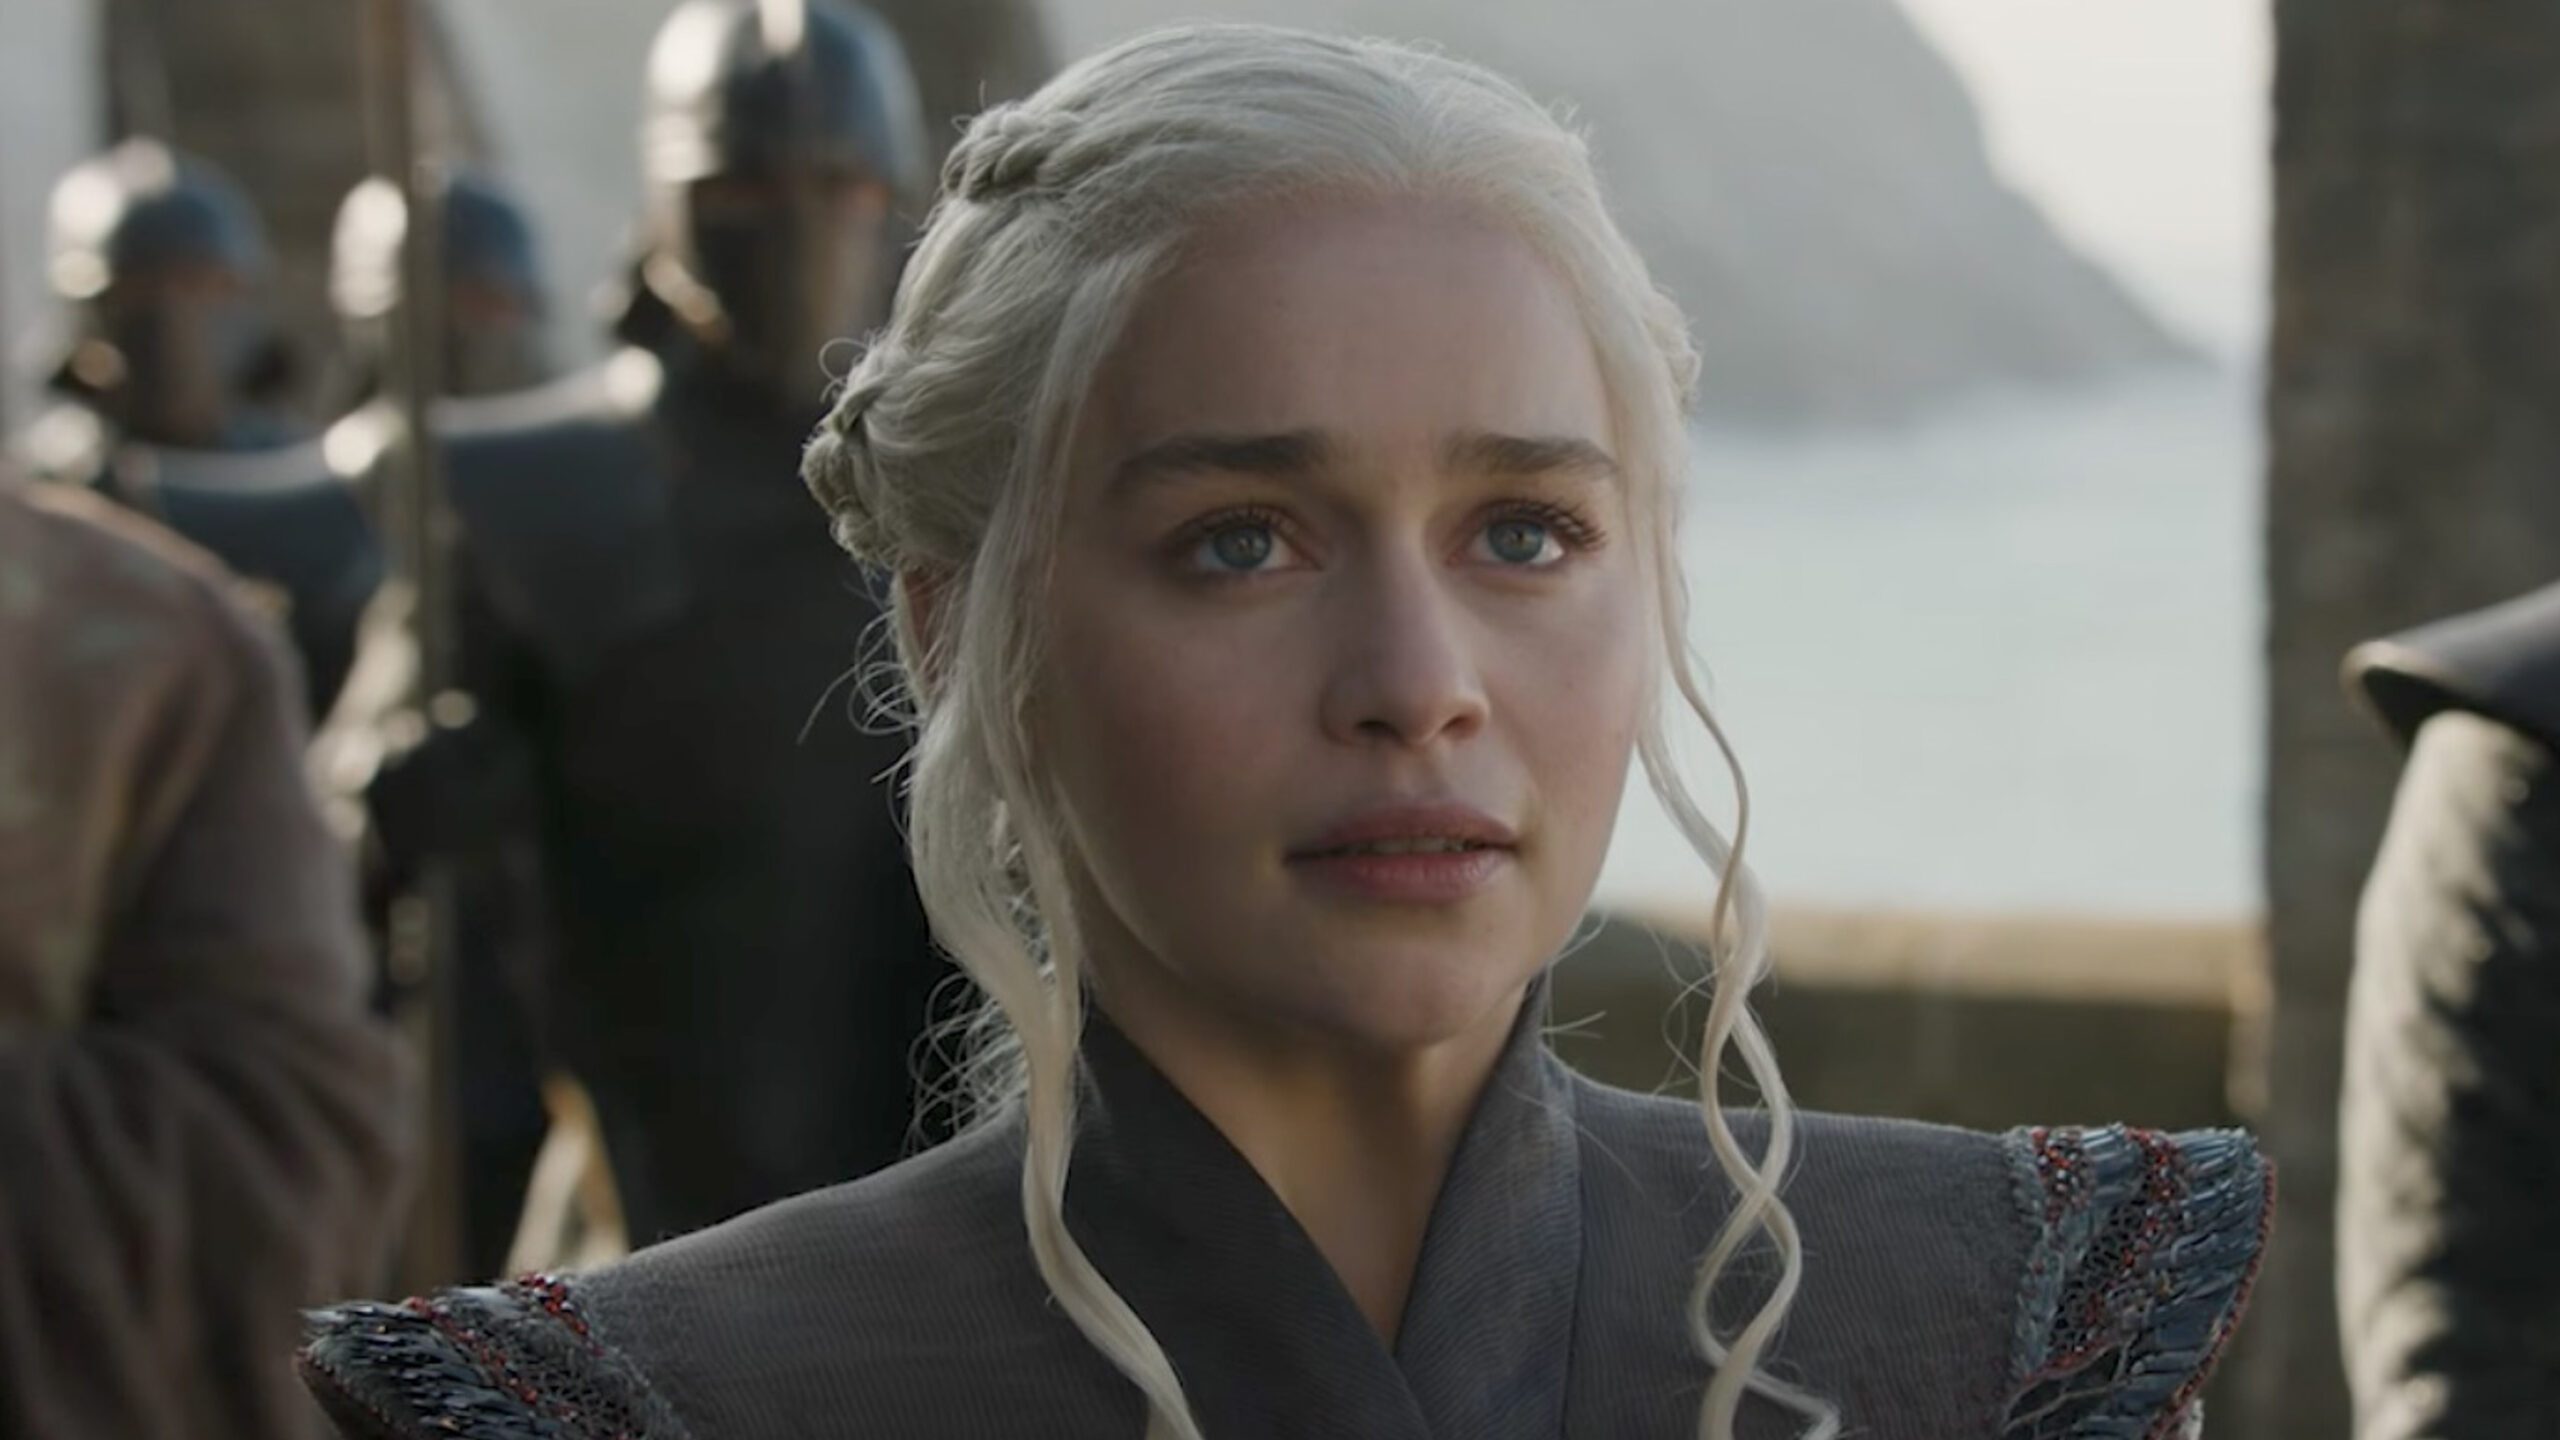 WATCH: A new ‘Game of Thrones’ season 7 trailer is out